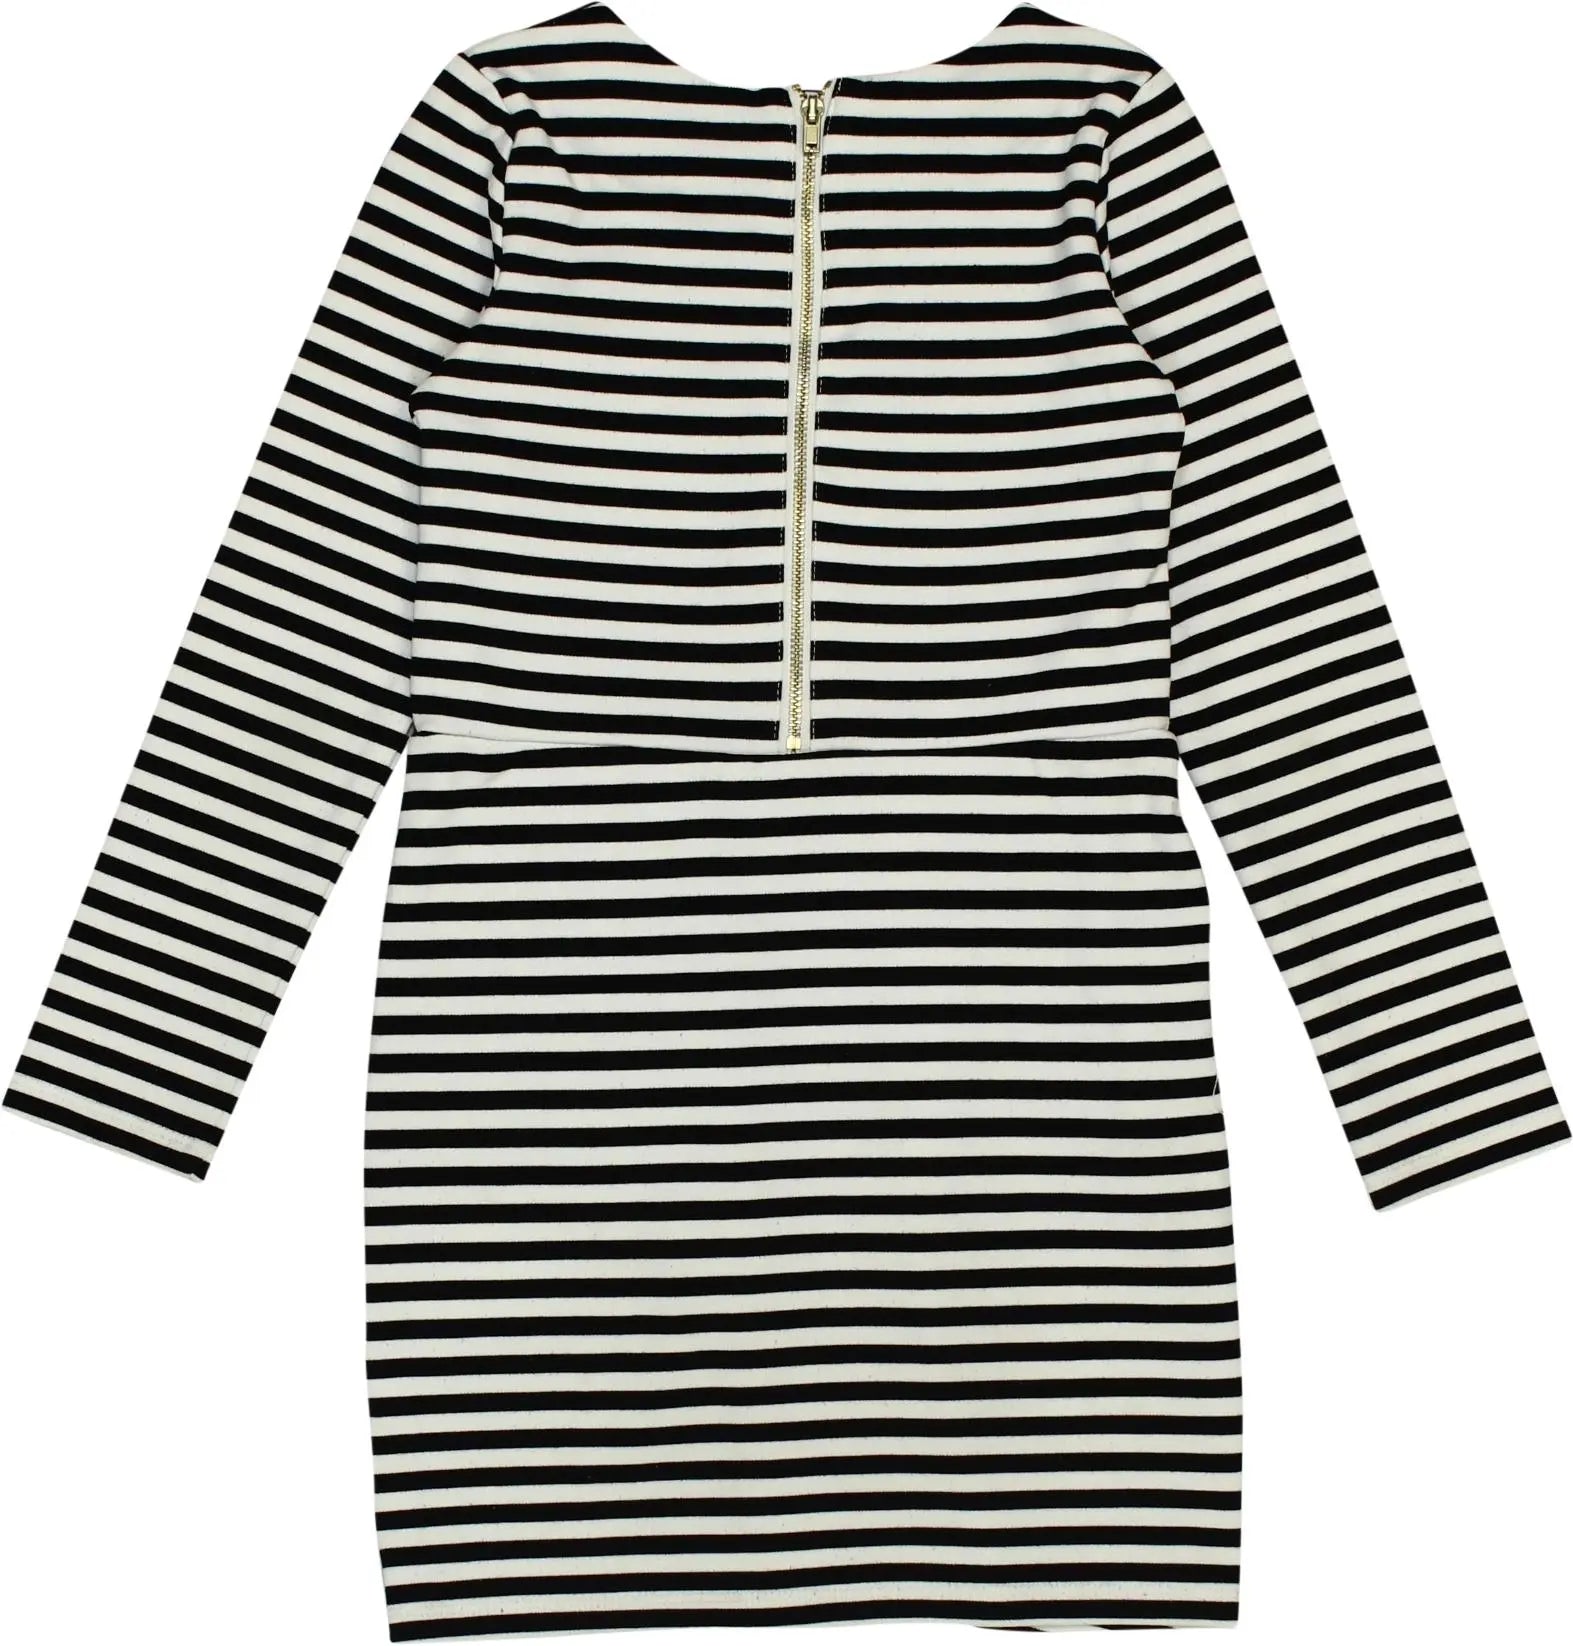 H&M - Striped Dress- ThriftTale.com - Vintage and second handclothing